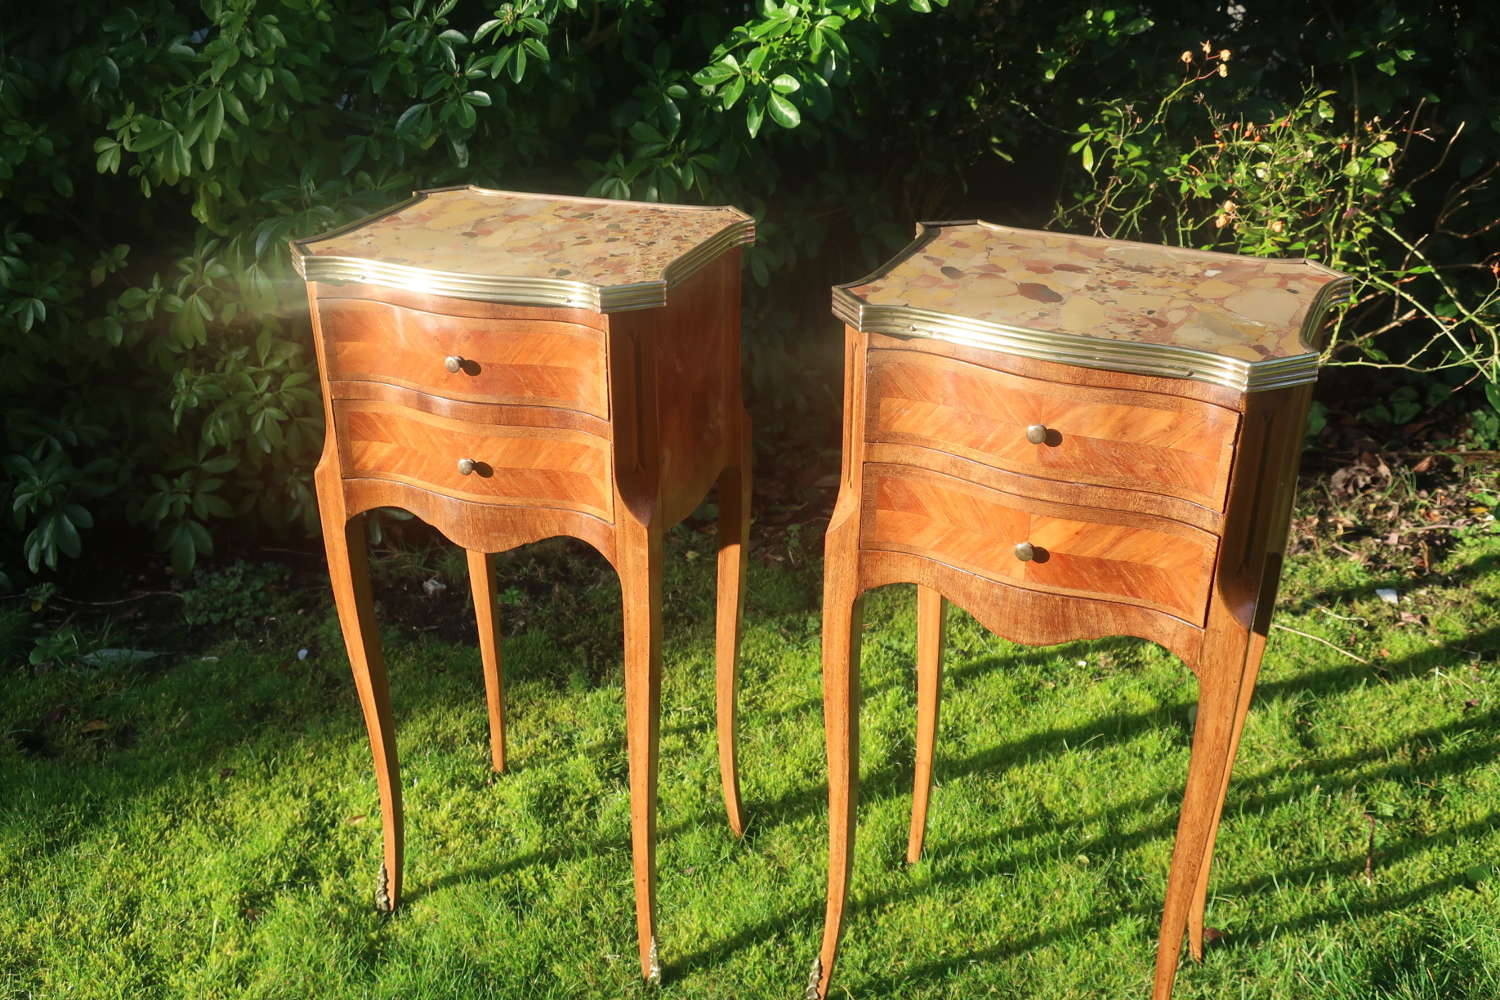 Pair of inlaid bedside tables